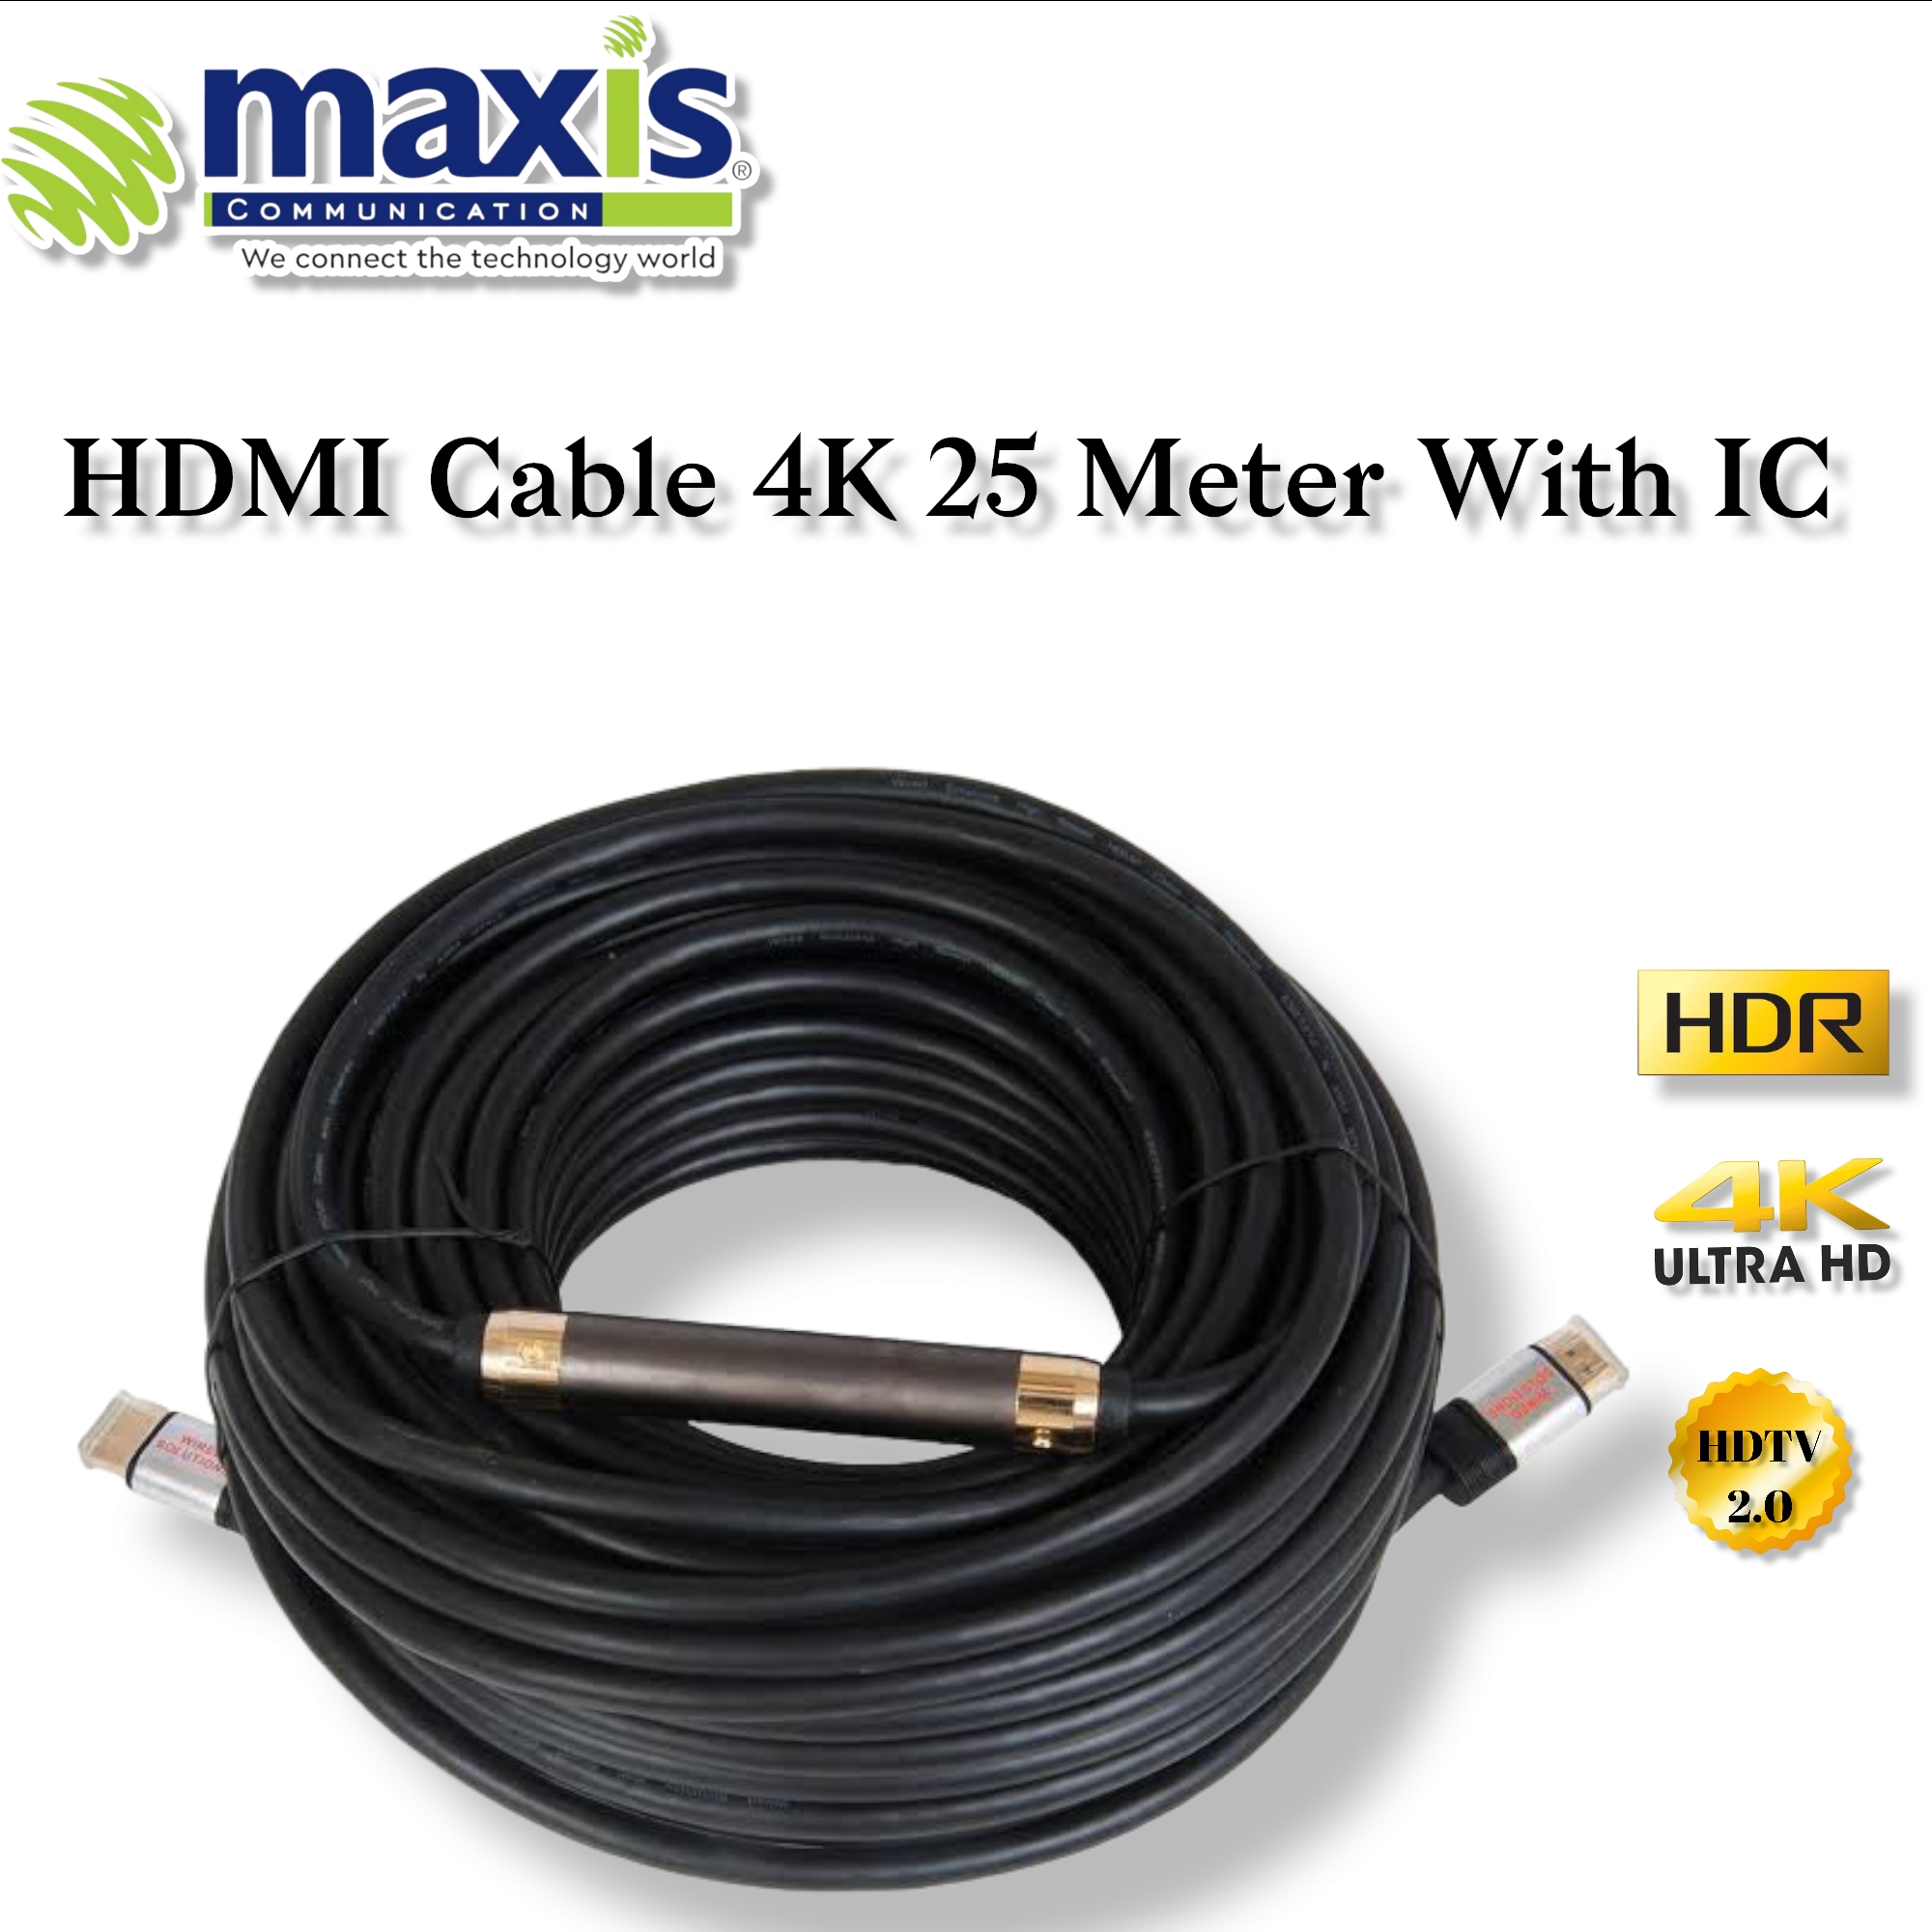 product.php?id=FISCO 2.0v HDM Premium Cable Ultra Hd 4k 25M (WITH IC)